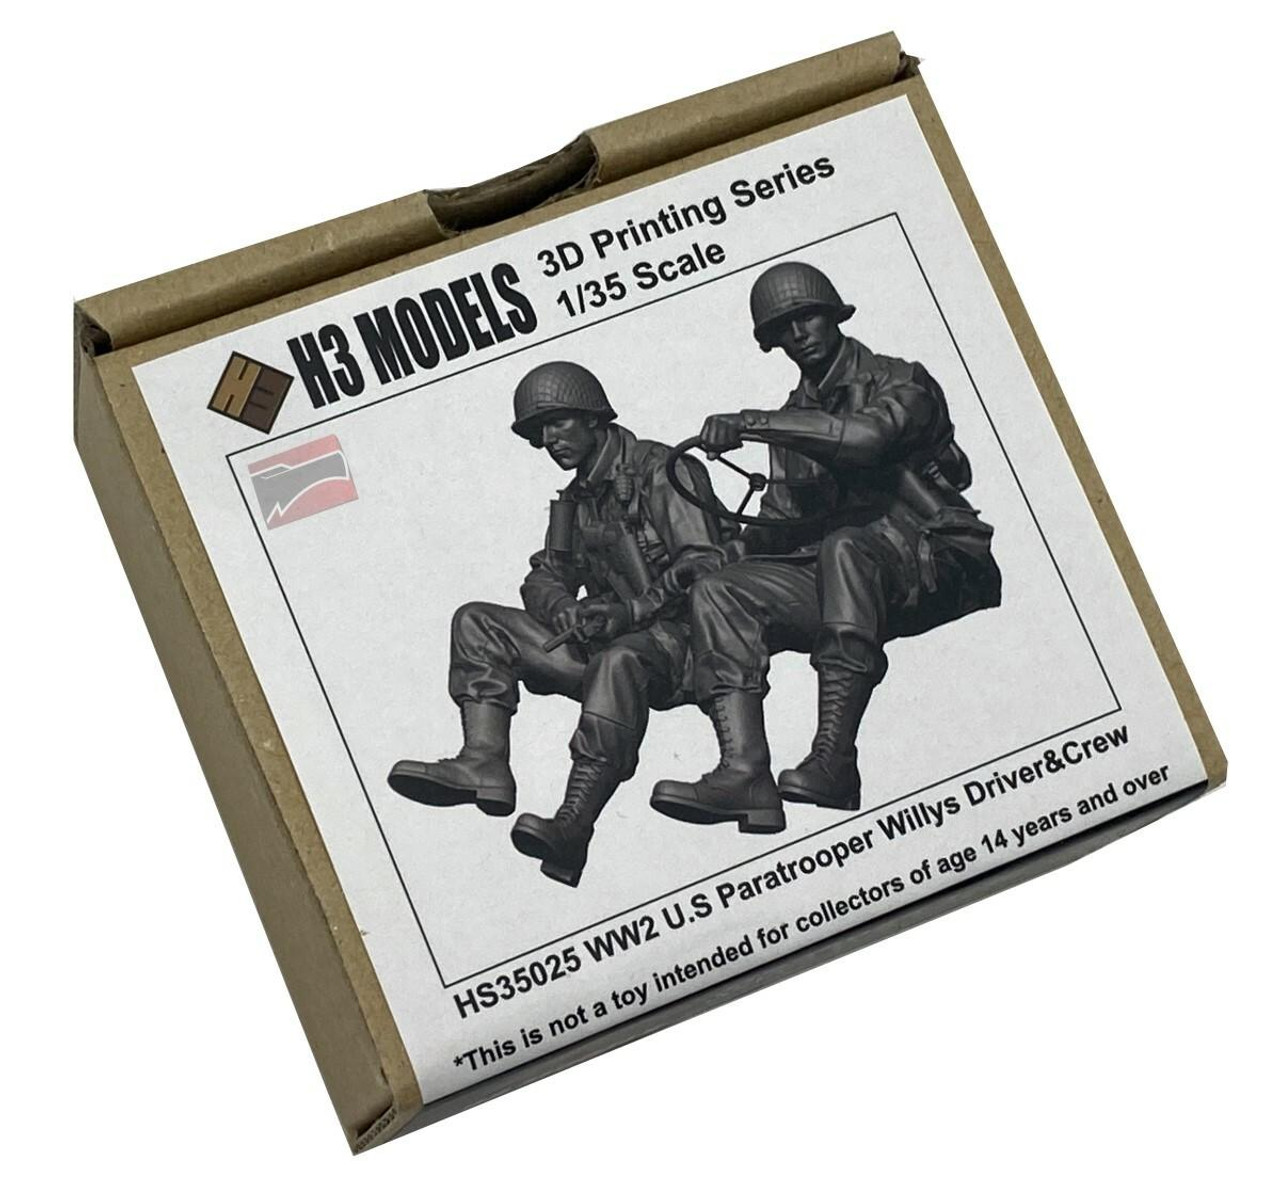 H3M35025 1/35 H3 Models WWII US Paratrooper Willys Driver and Crew Resin Model Kit 35025 MMD Squadron